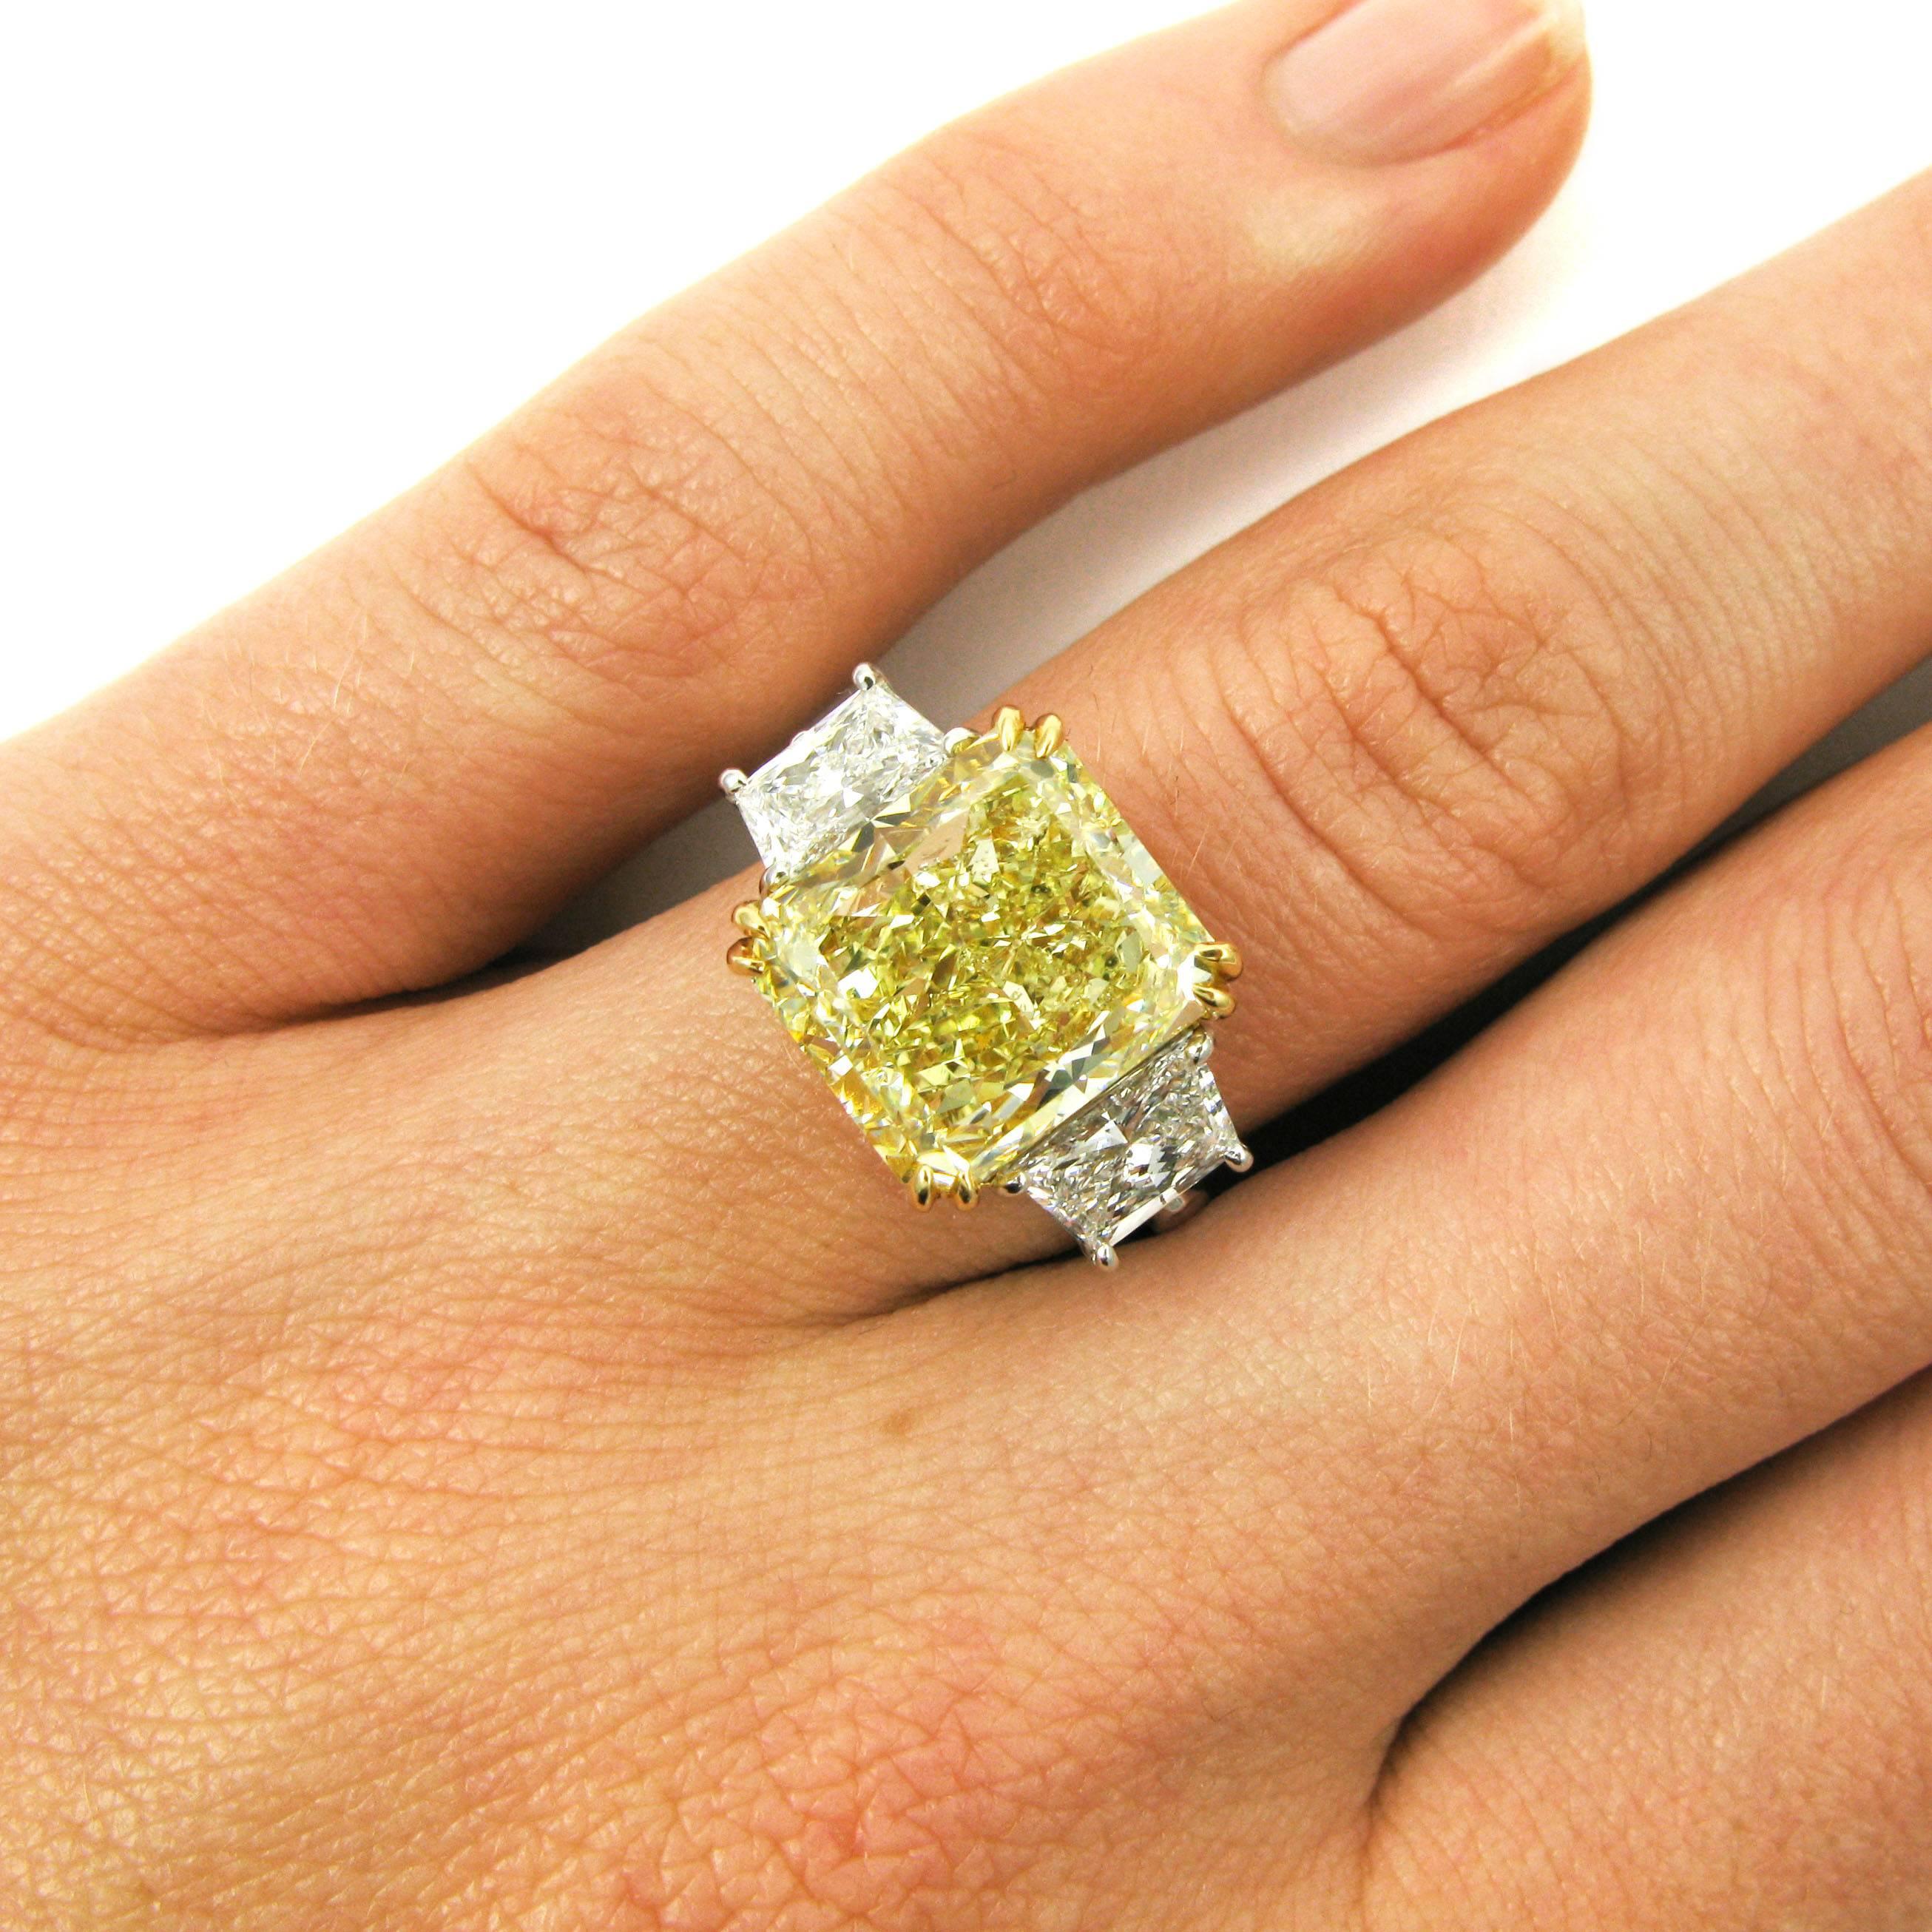 A bright and sunny 7.53 carat radiant-cut diamond with Fancy Yellow color and VS2 clarity. The radiant is set in 18k yellow gold and flanked by two trapezoid-cut white diamonds totaling 1.44 carats. Mounted in platinum. 

Purchase includes GIA